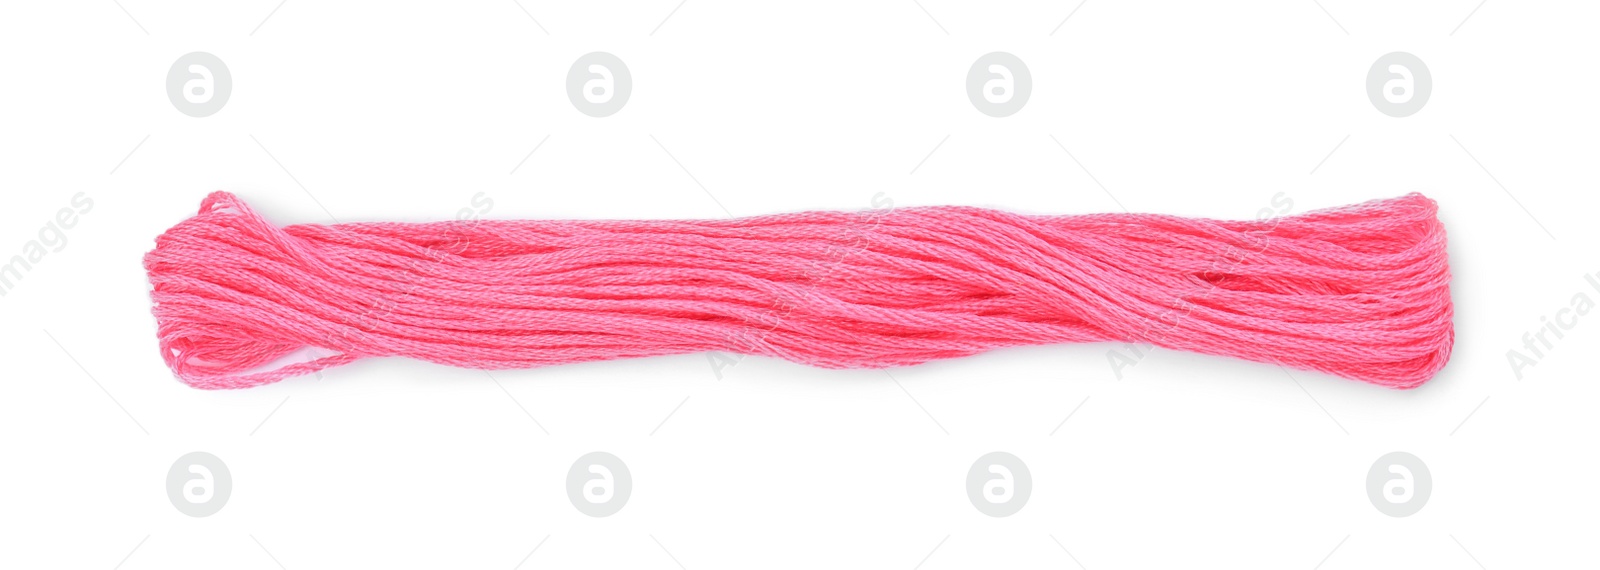 Photo of Bright pink embroidery thread on white background